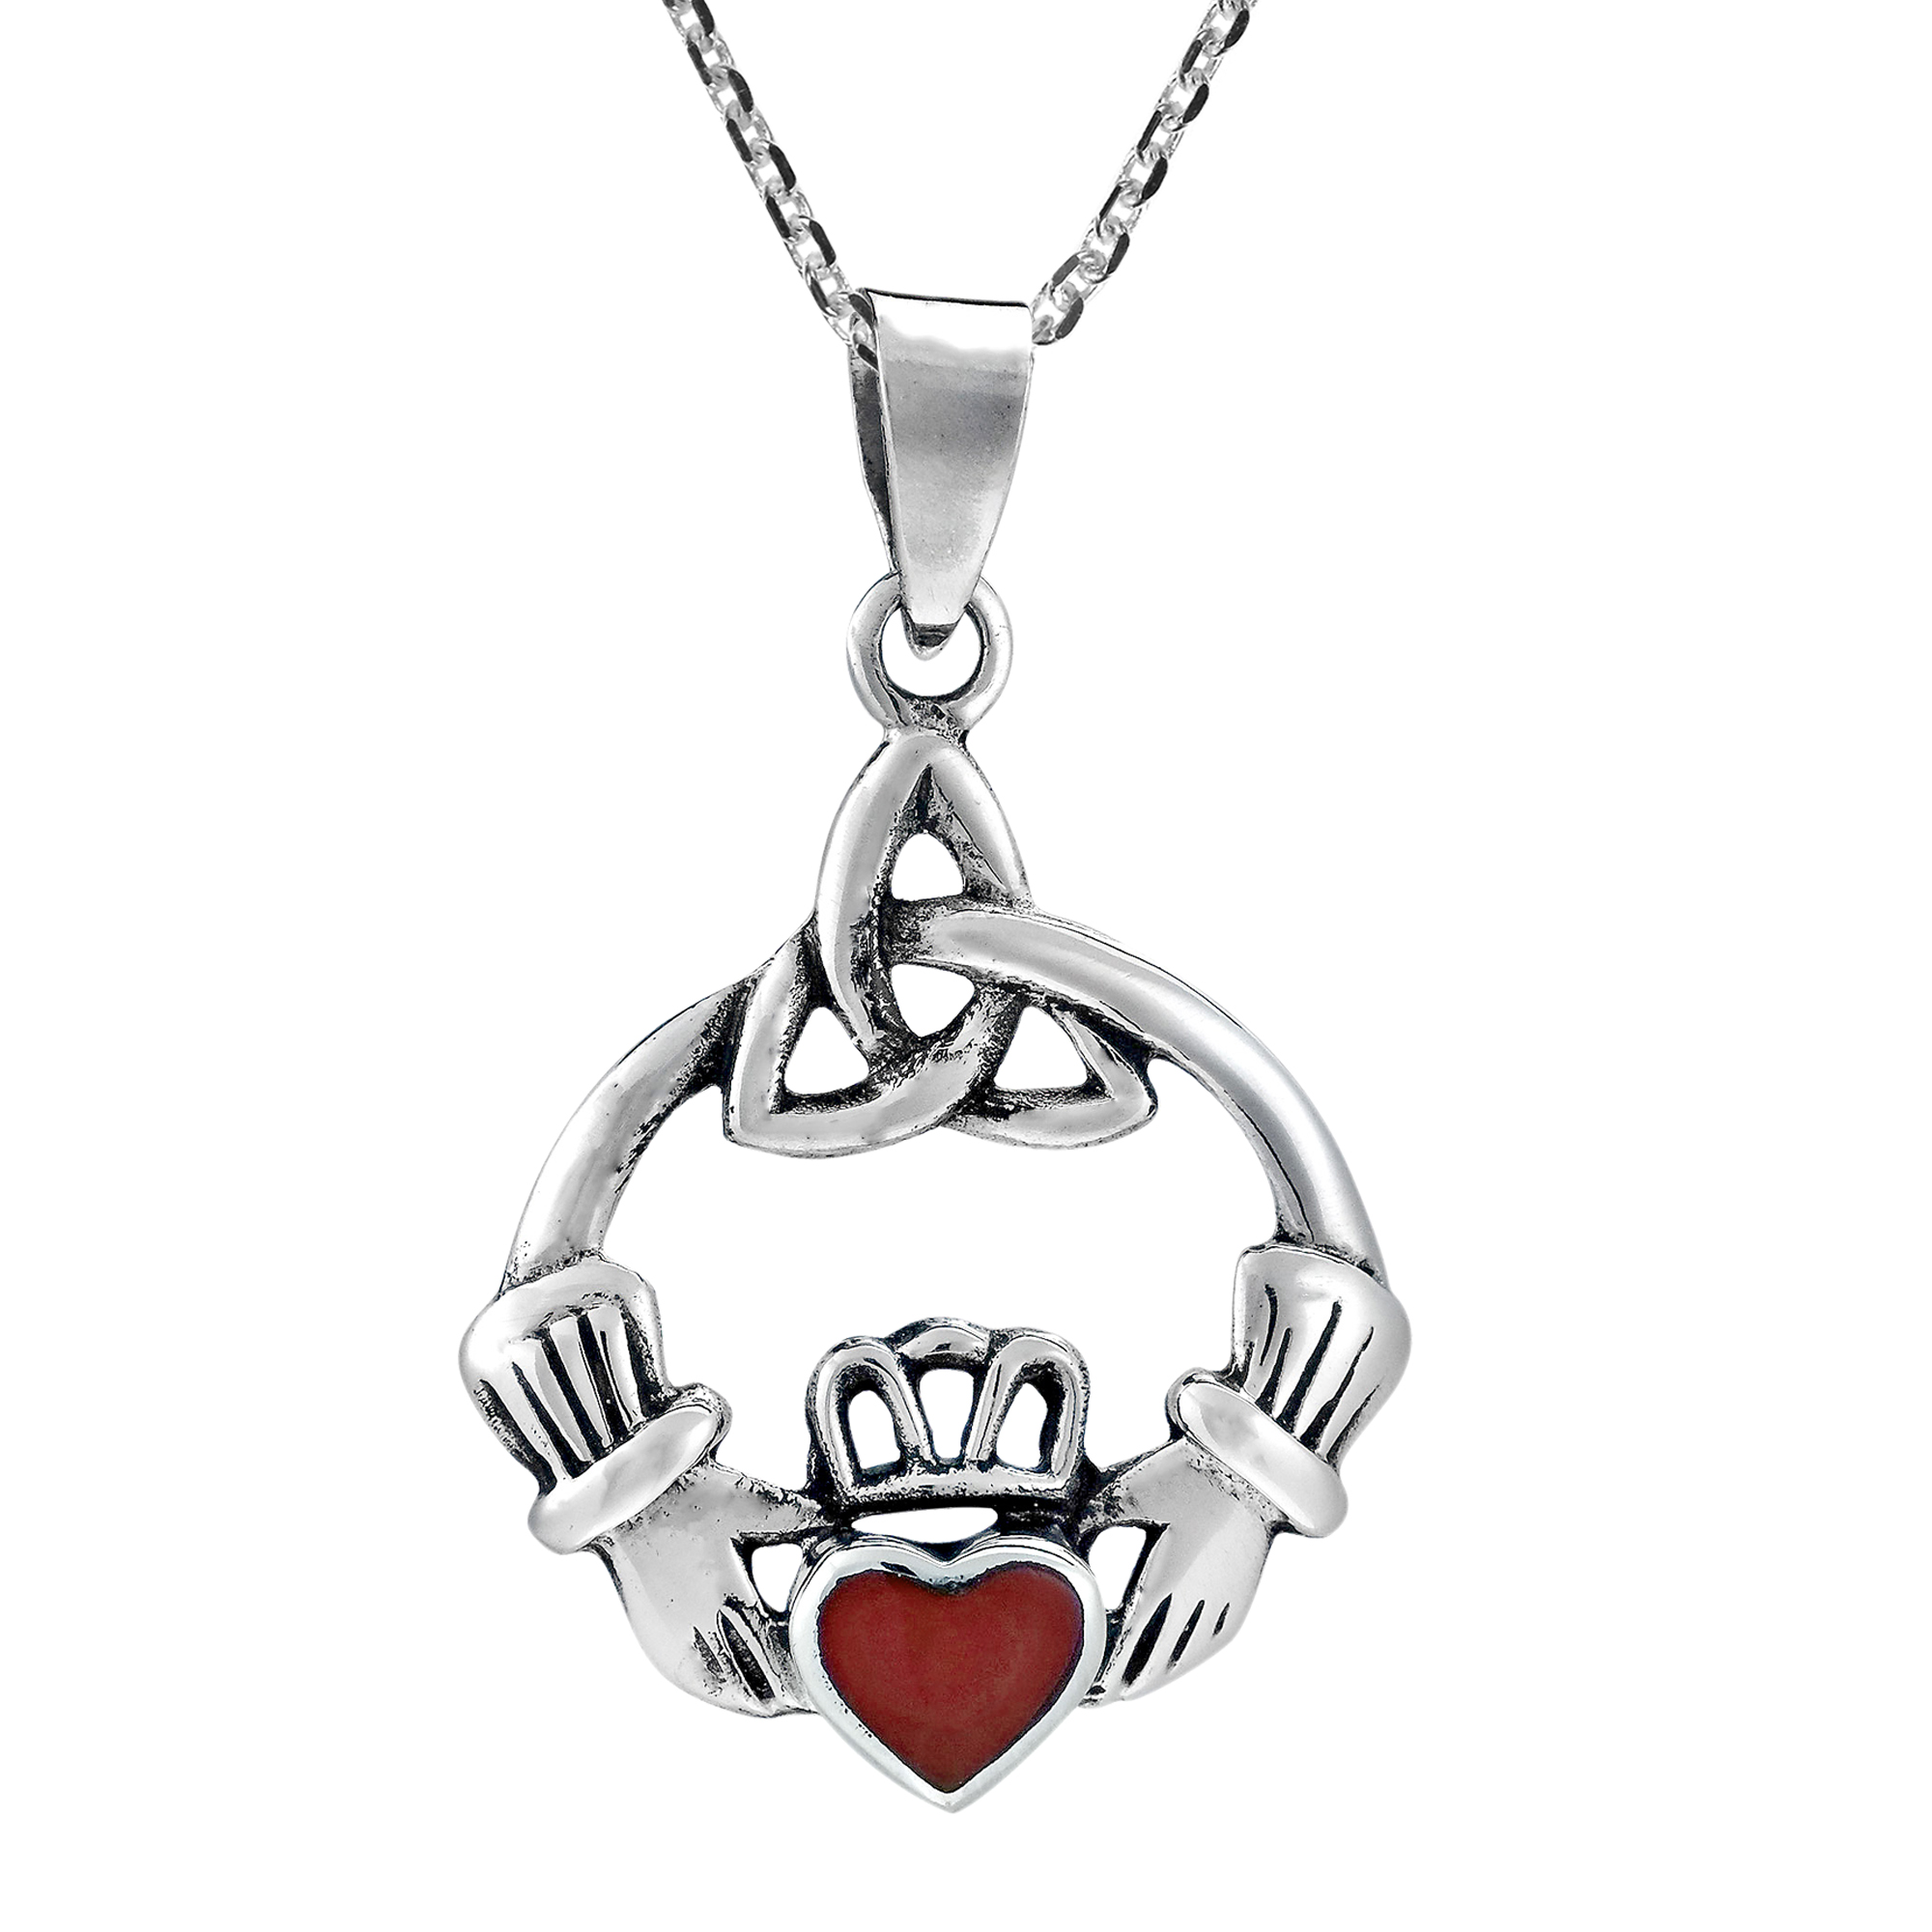 AeraVida Claddagh Heart Round Celtic Knot .925 Sterling Silver Pendant